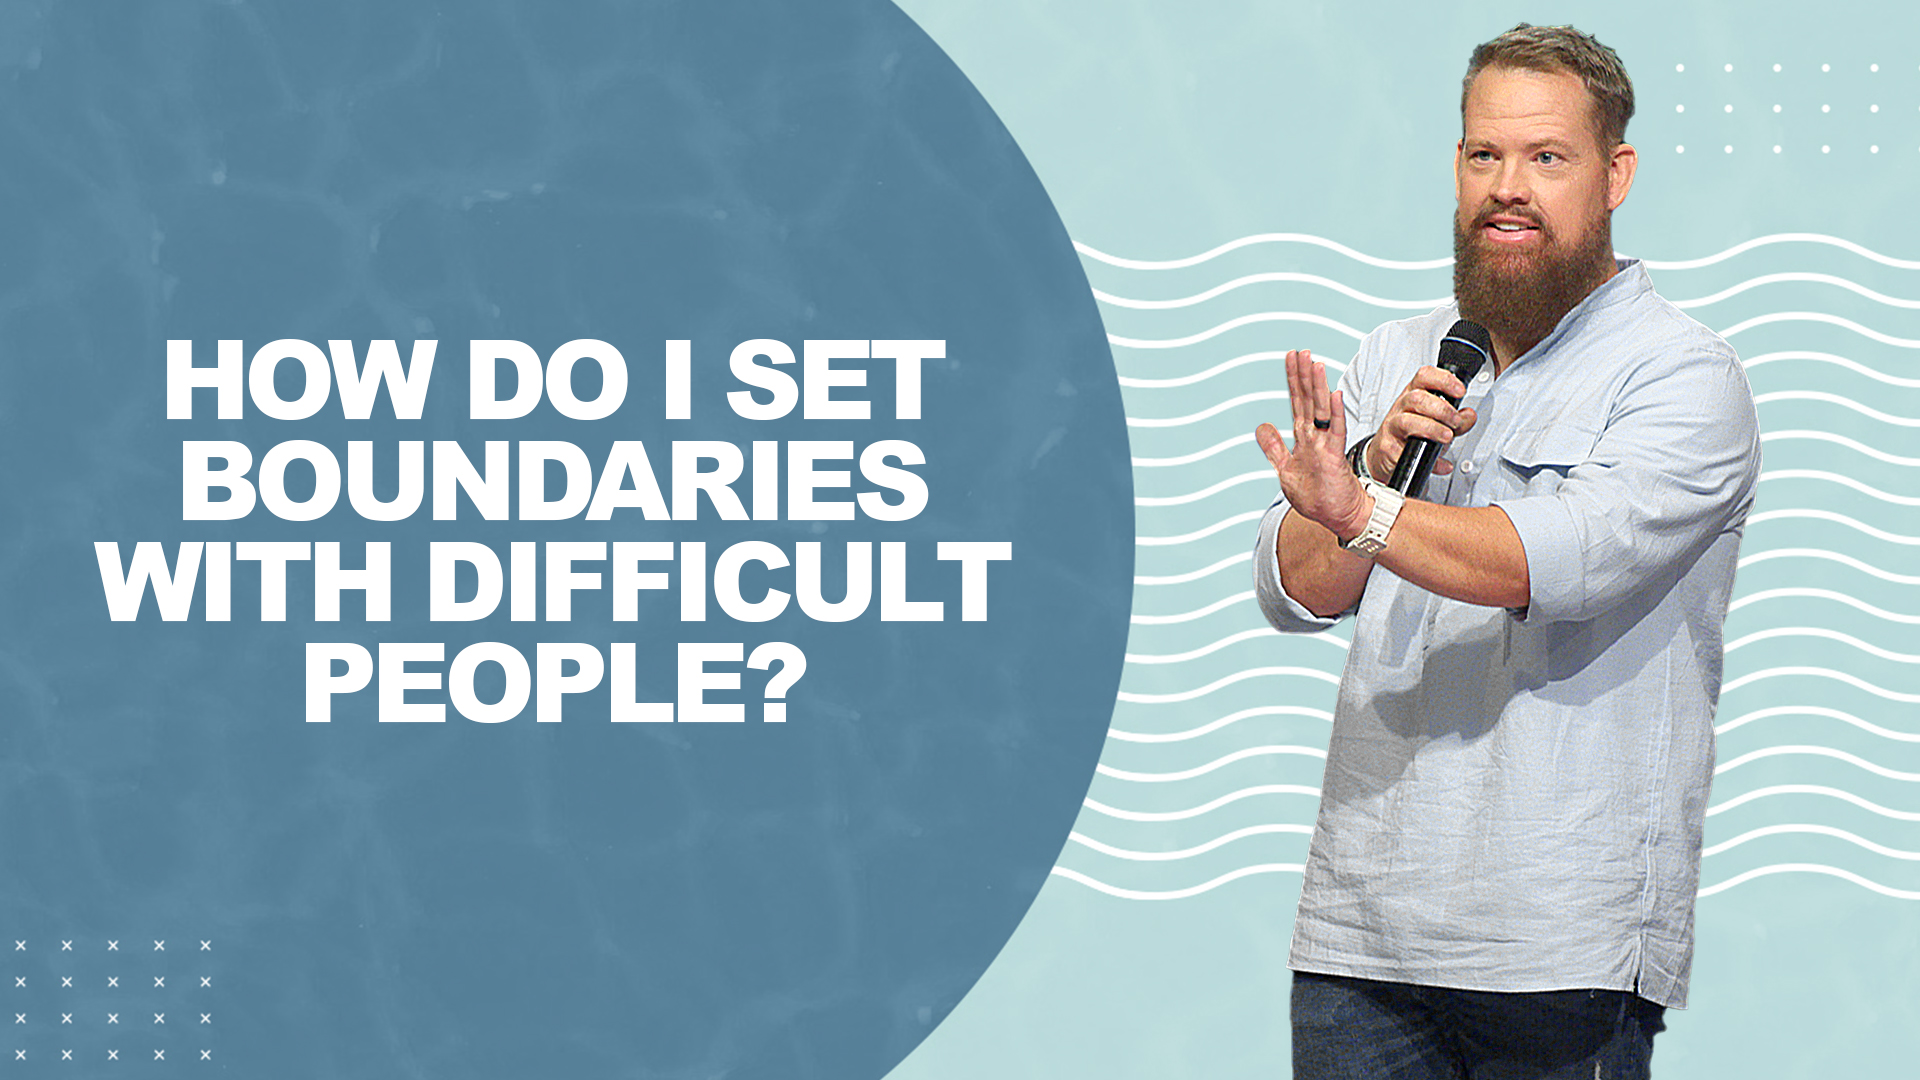 How Do I Set Boundaries With Difficult People?